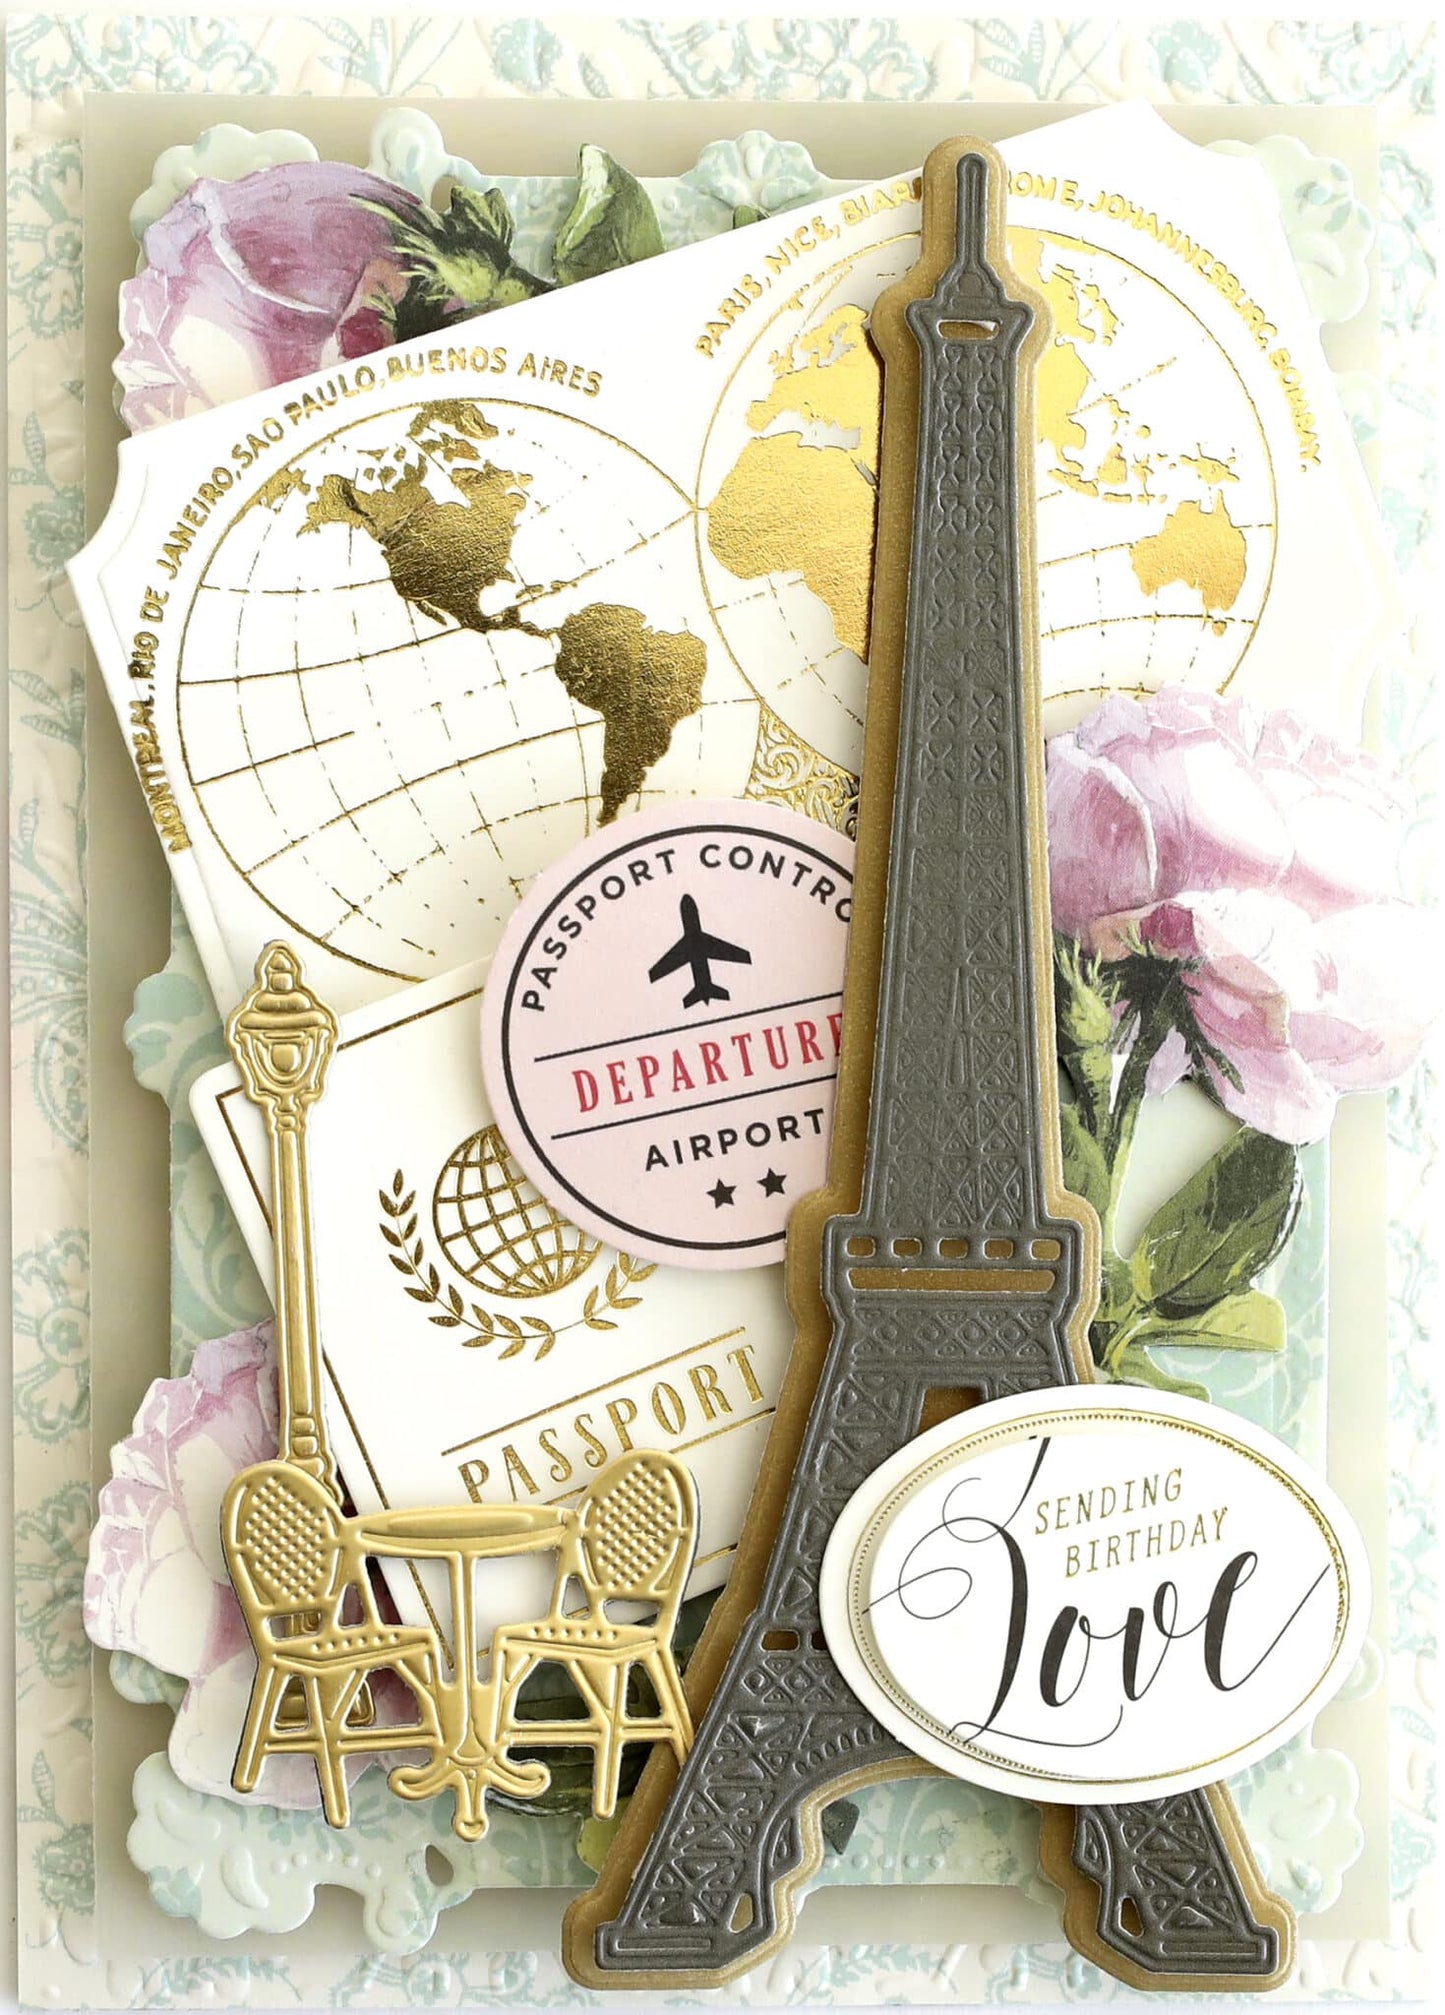 a card with a picture of the eiffel tower.